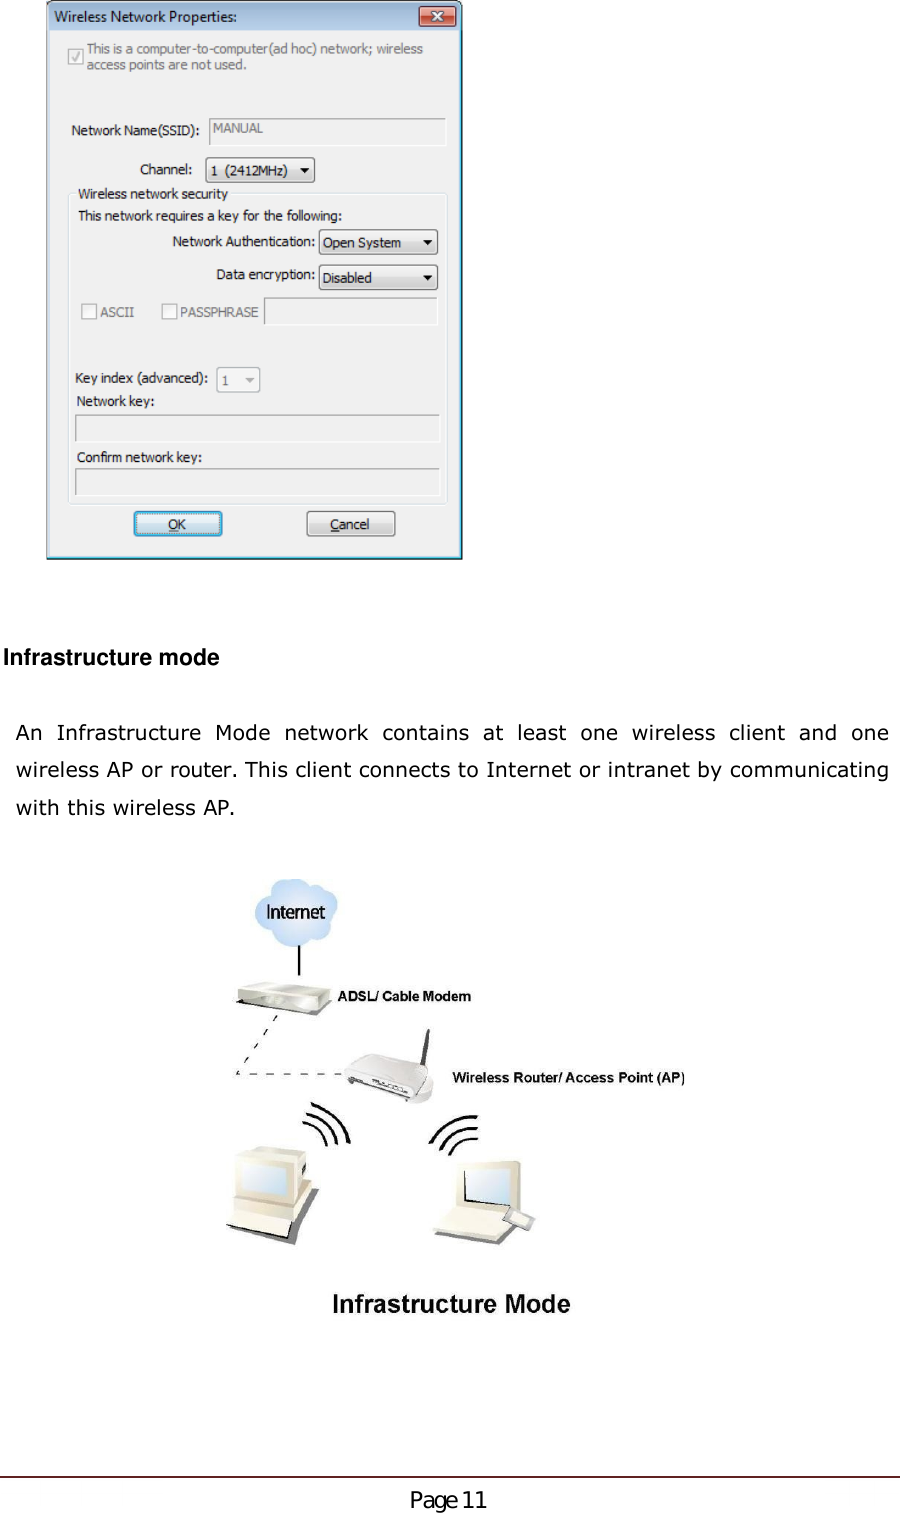 Infrastructure modeAn  Infrastructure  Mode  network  contains  at  least  one  wireless  client  and  onewireless AP or router. This client connects to Internet or intranet by communicatingwith this wireless AP.Page 11